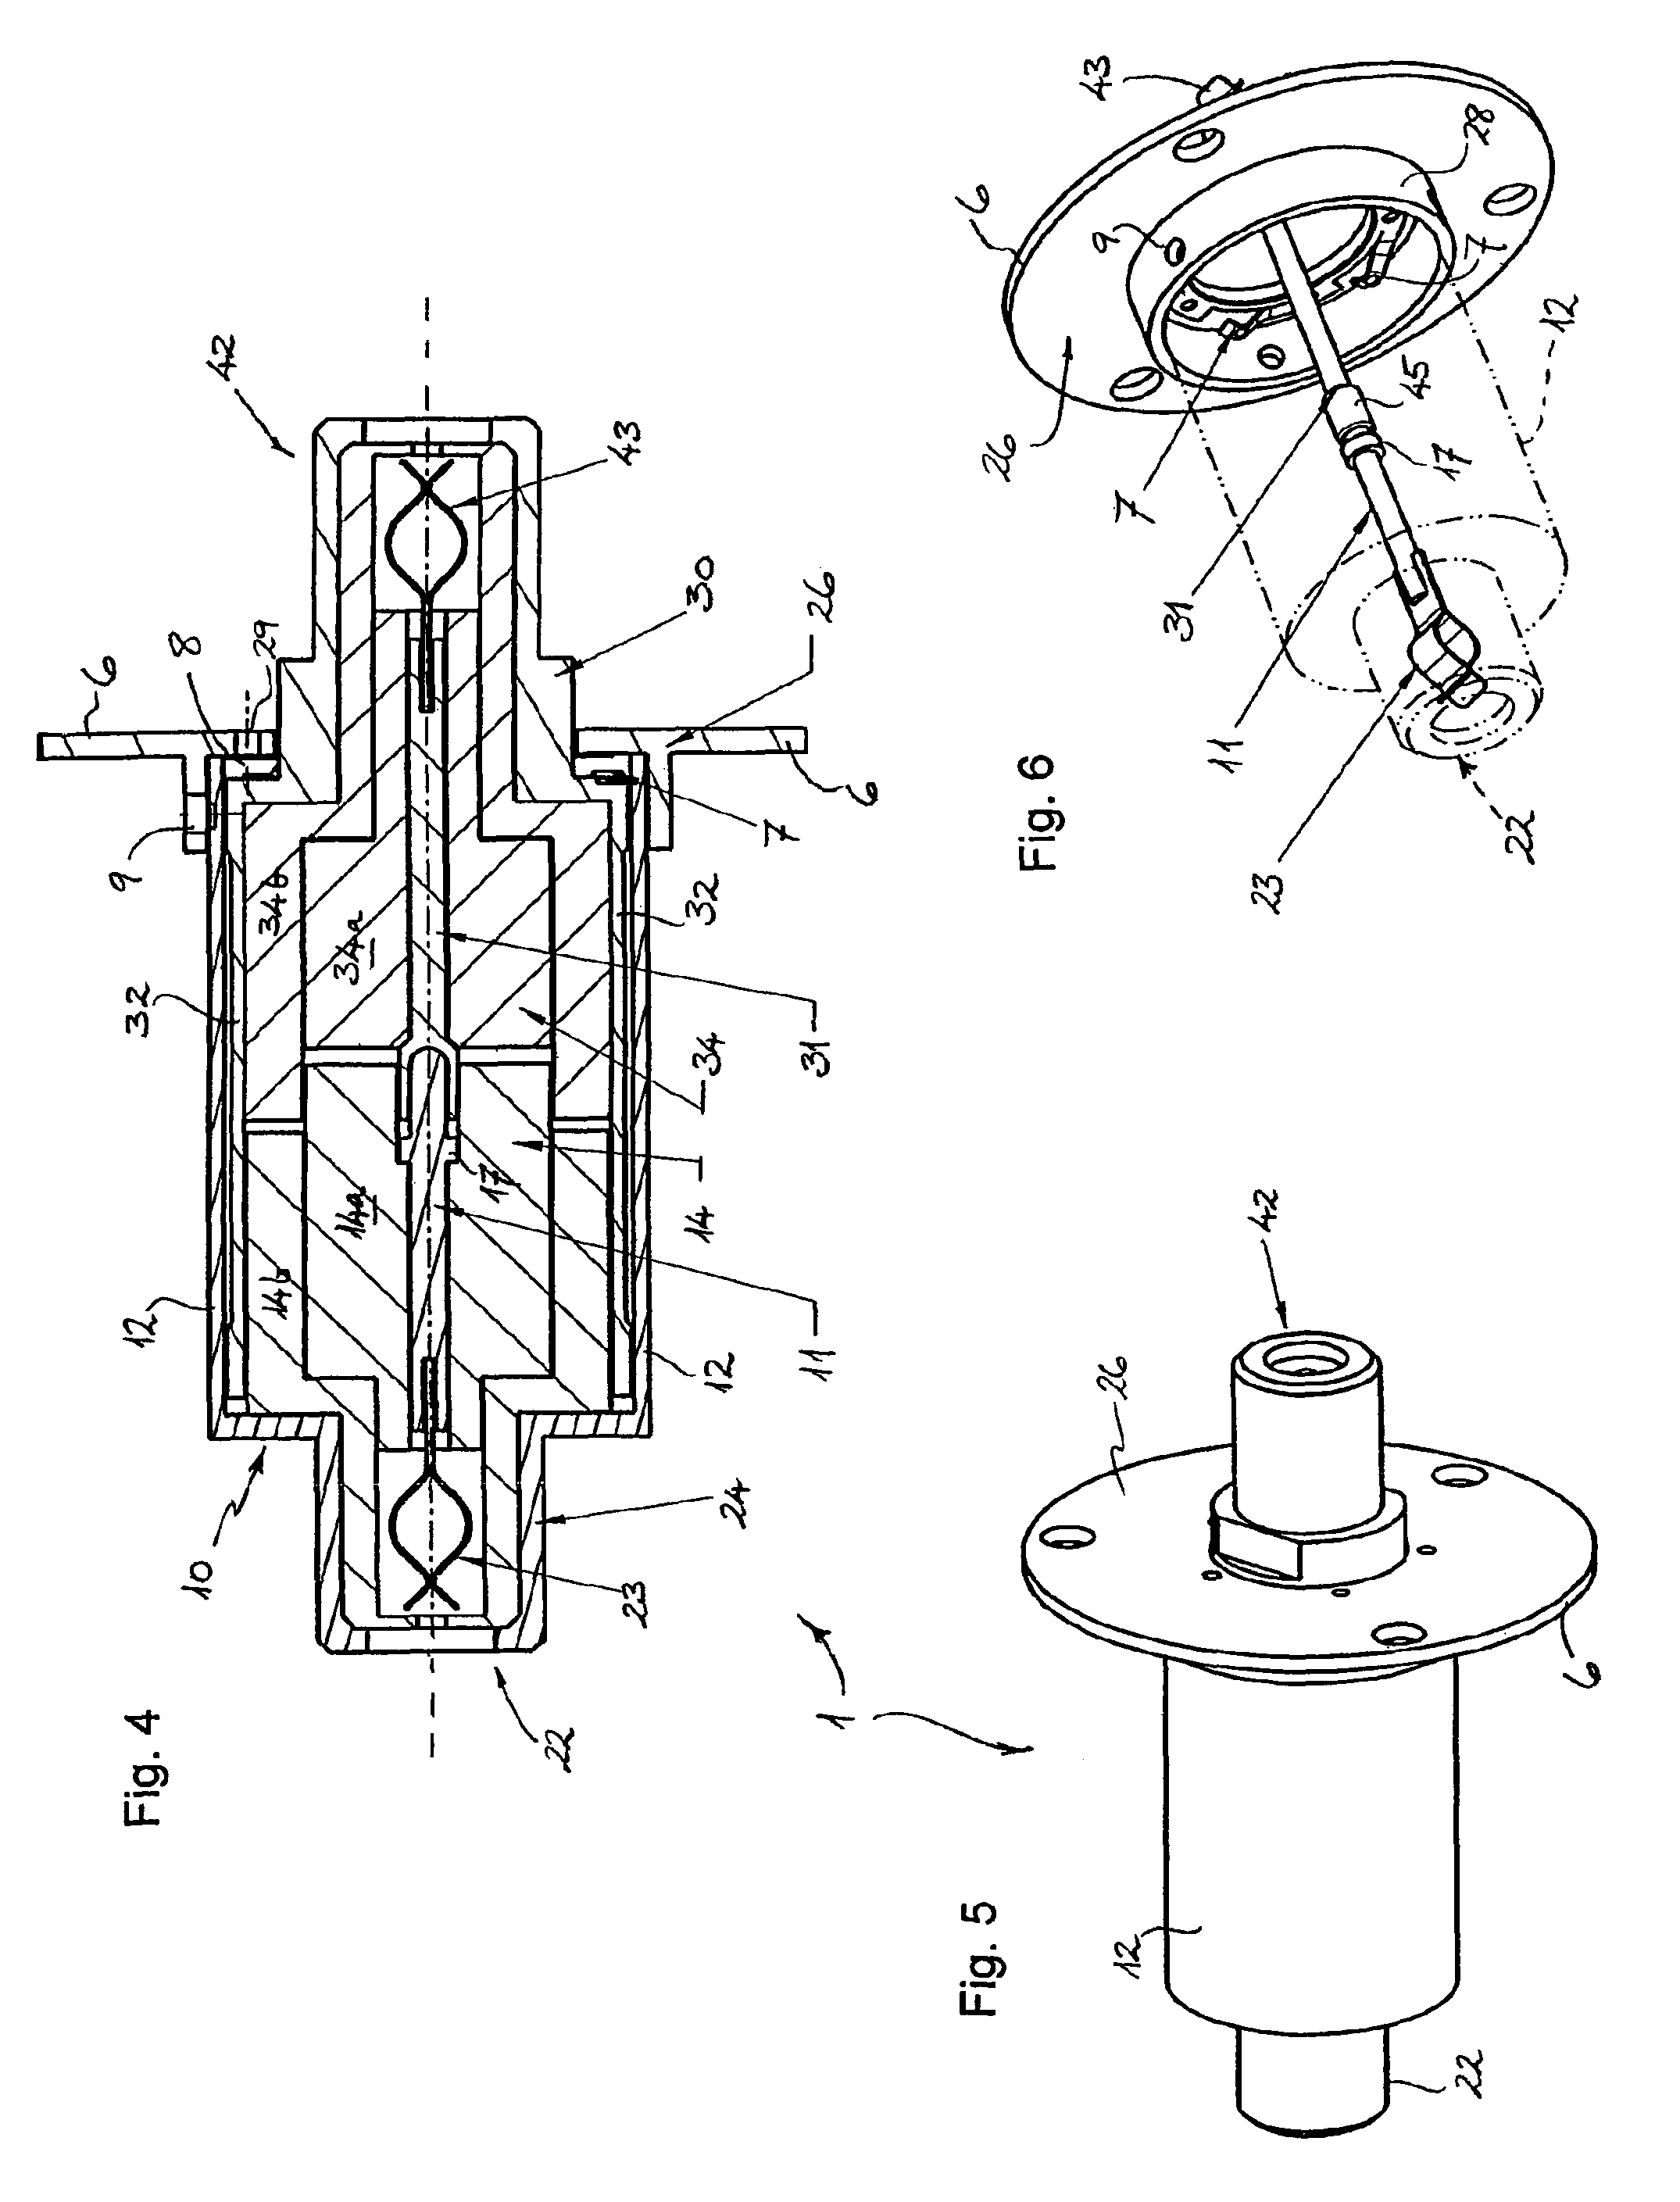 Rotatable electrical coupling device